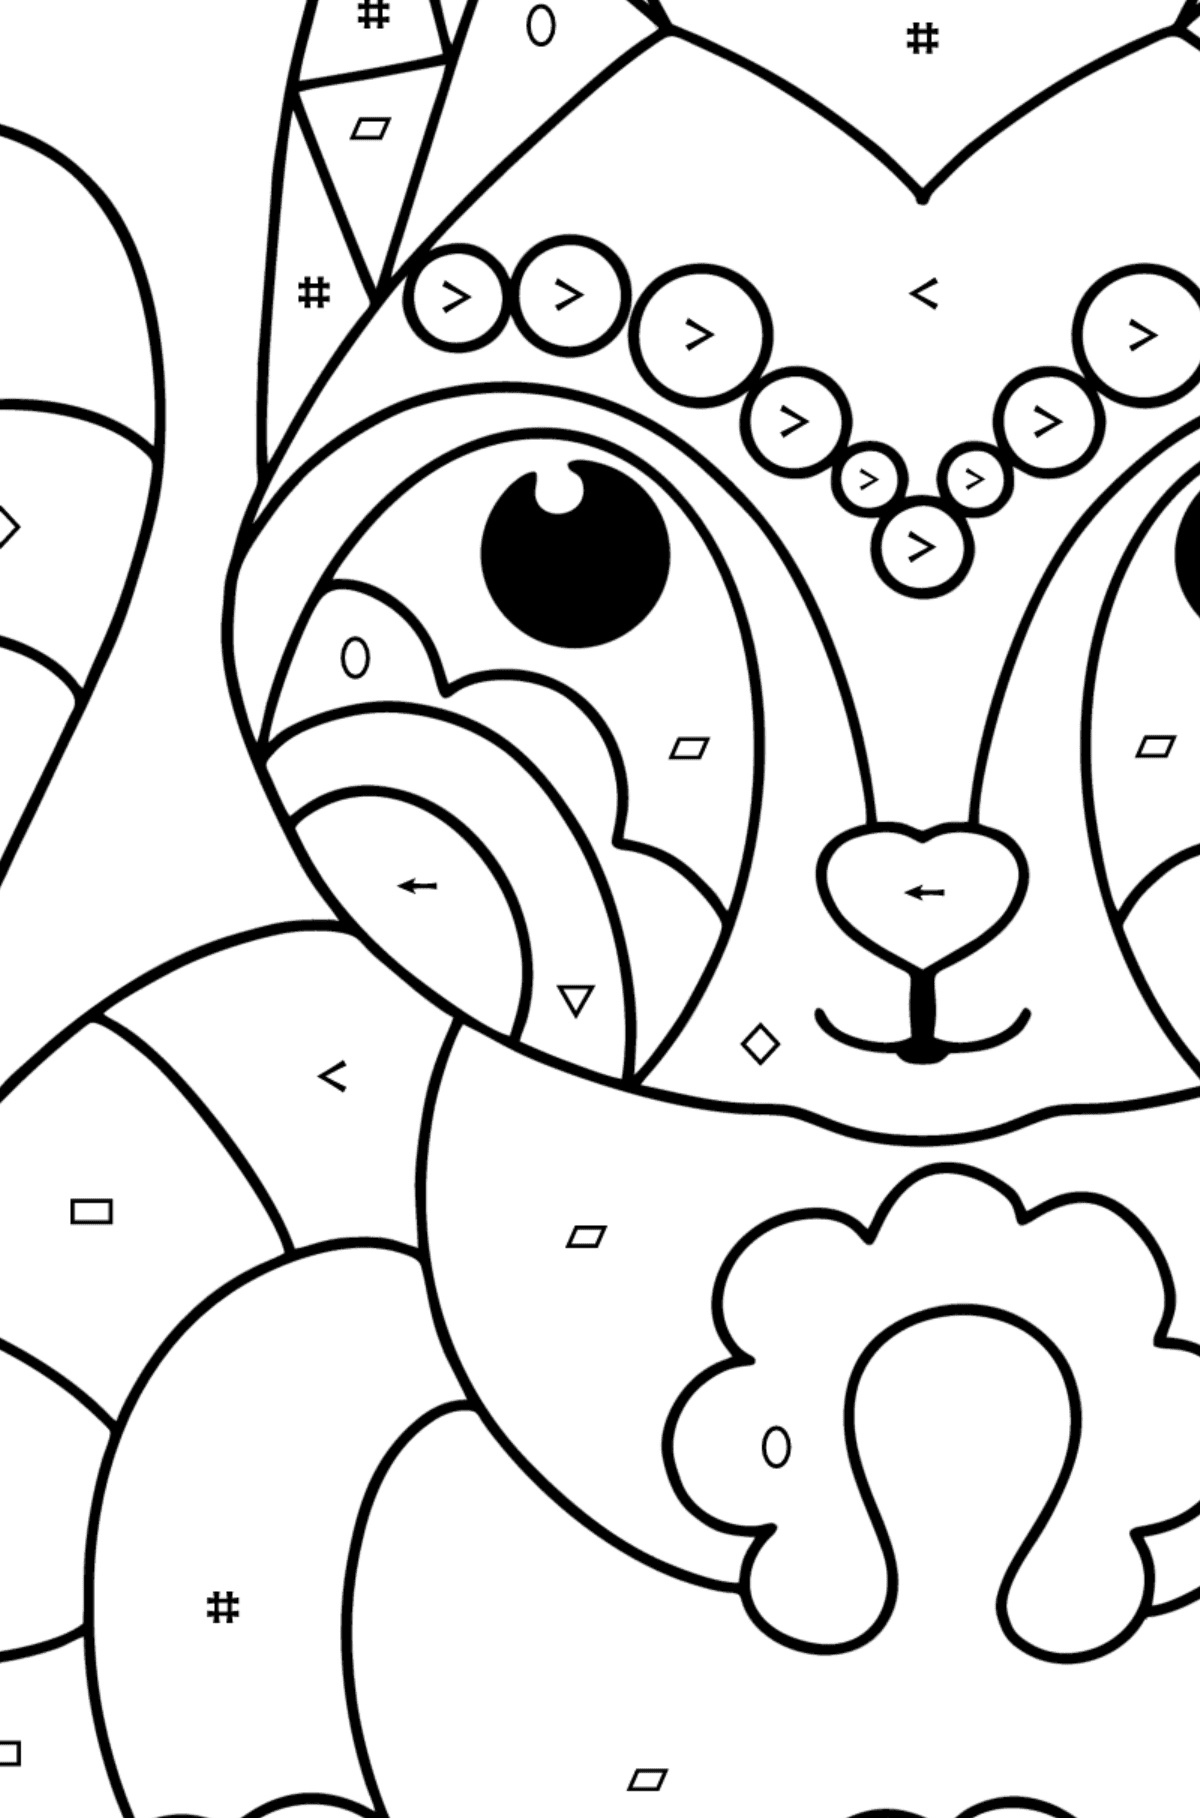 Coloring page Anti stress animals - raccoon - Coloring by Symbols and Geometric Shapes for Kids